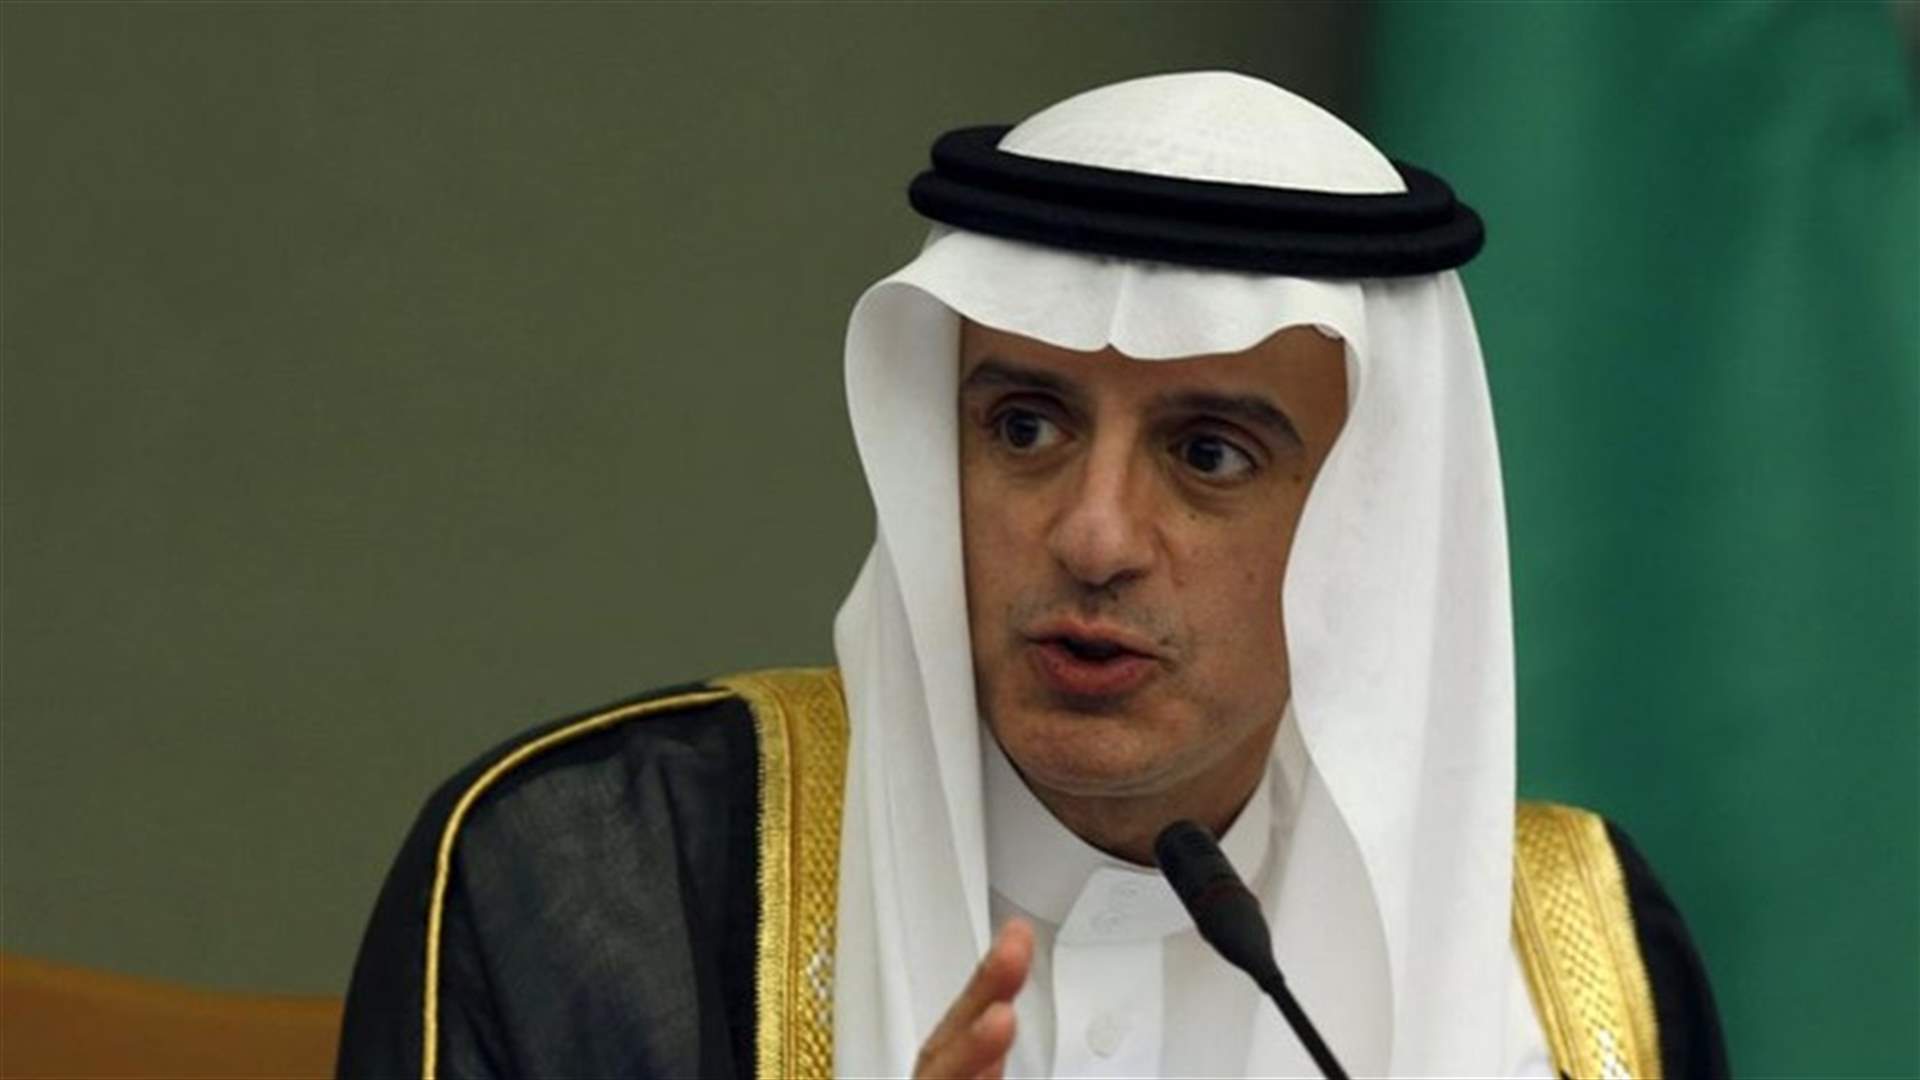 Saudi troop deployment in Syria up to US-led coalition -foreign minister